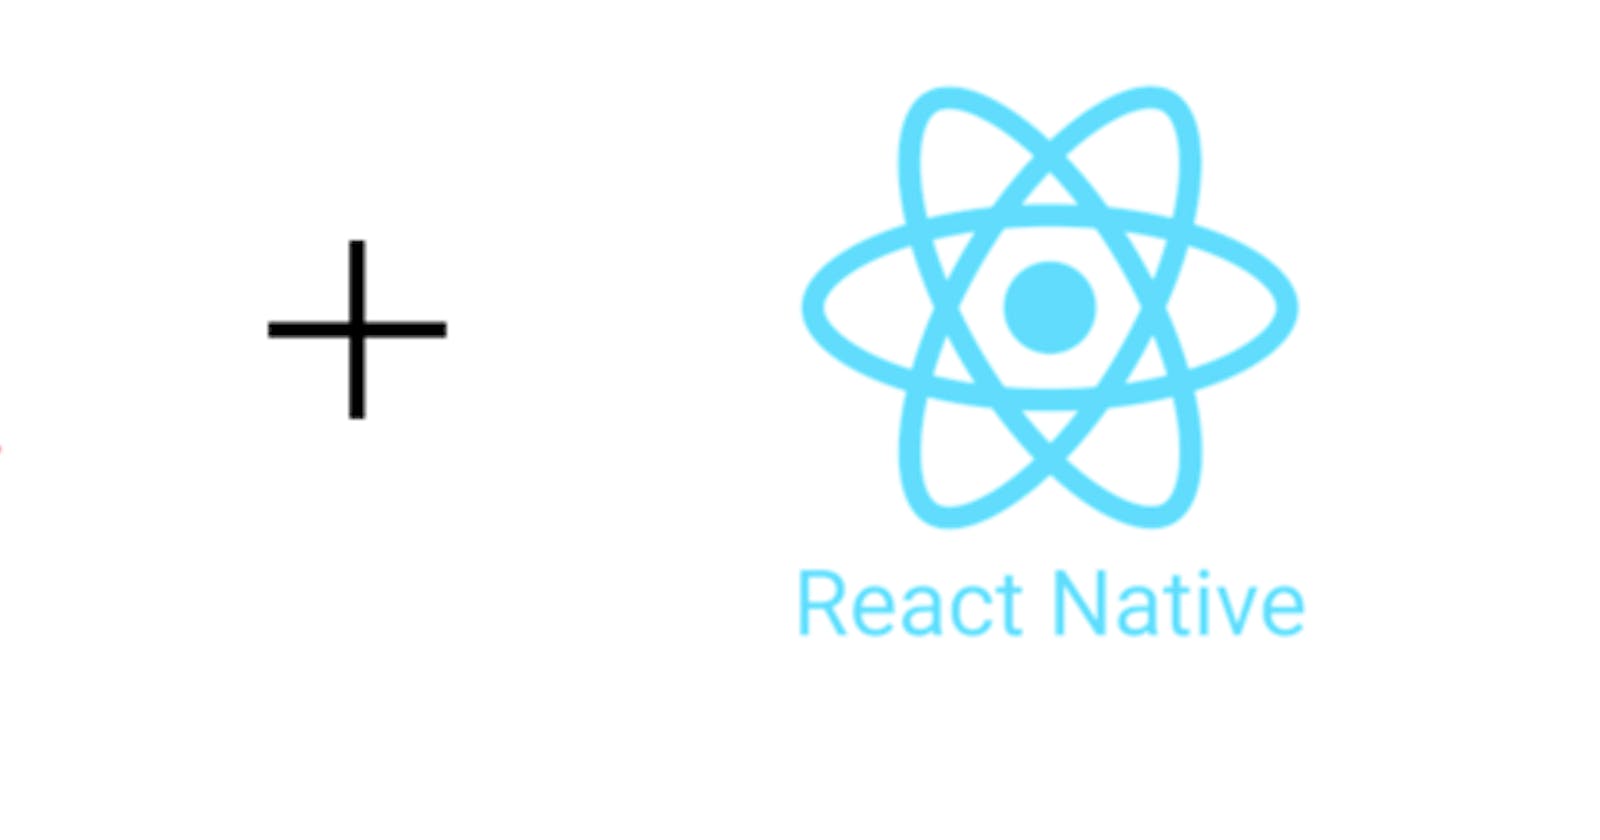 Using Feature Flags in React Native